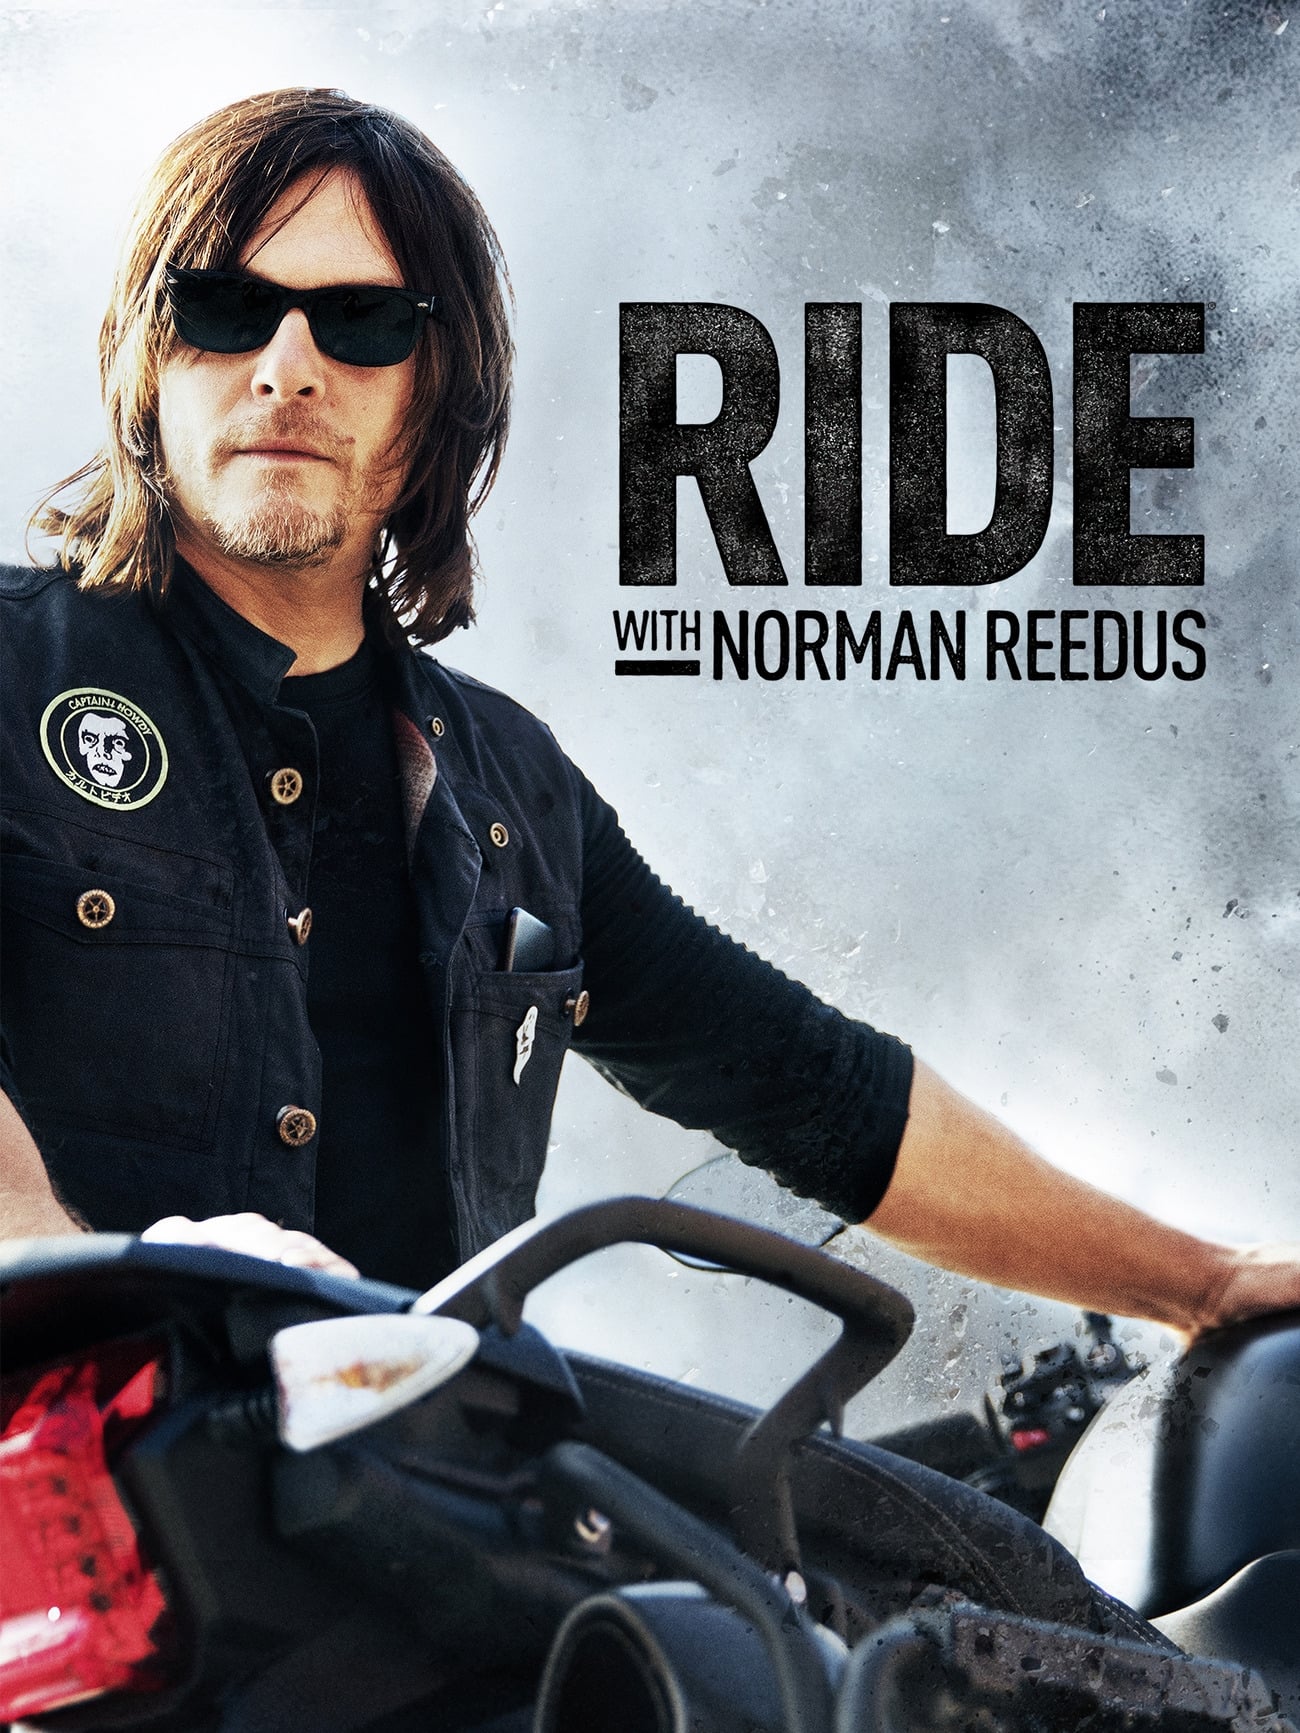 Caratula de Ride with Norman Reedus (Ride with Norman Reedus) 